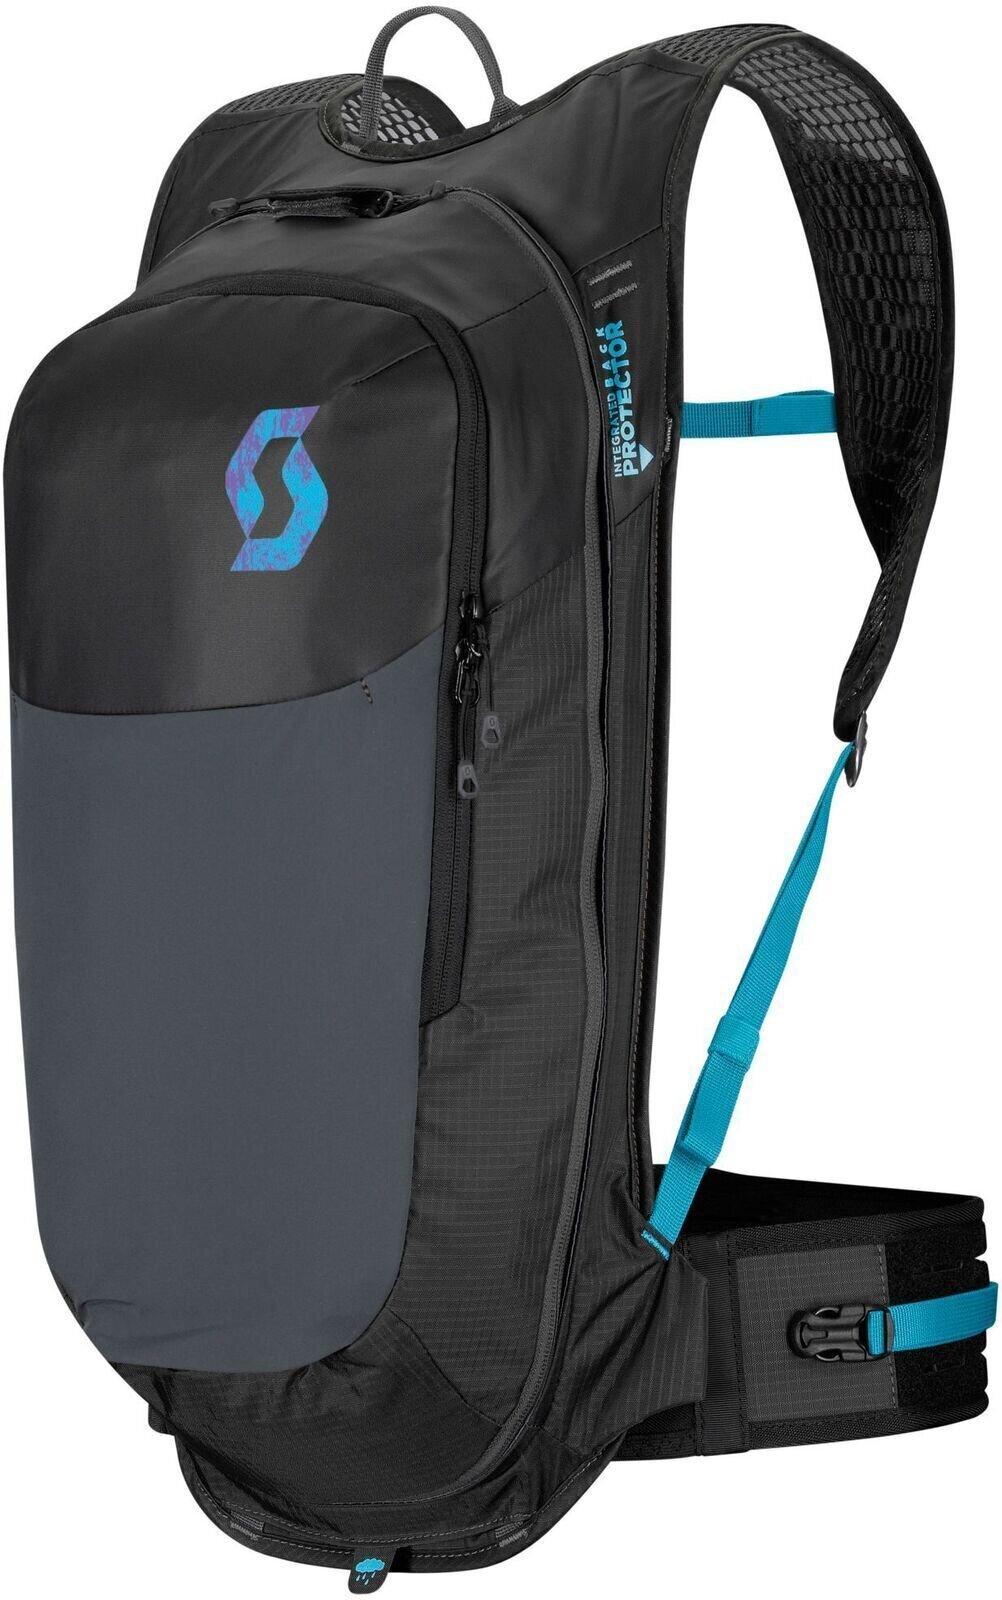 Cycling backpack and accessories Scott Trail Protect FR' 20 Black Backpack